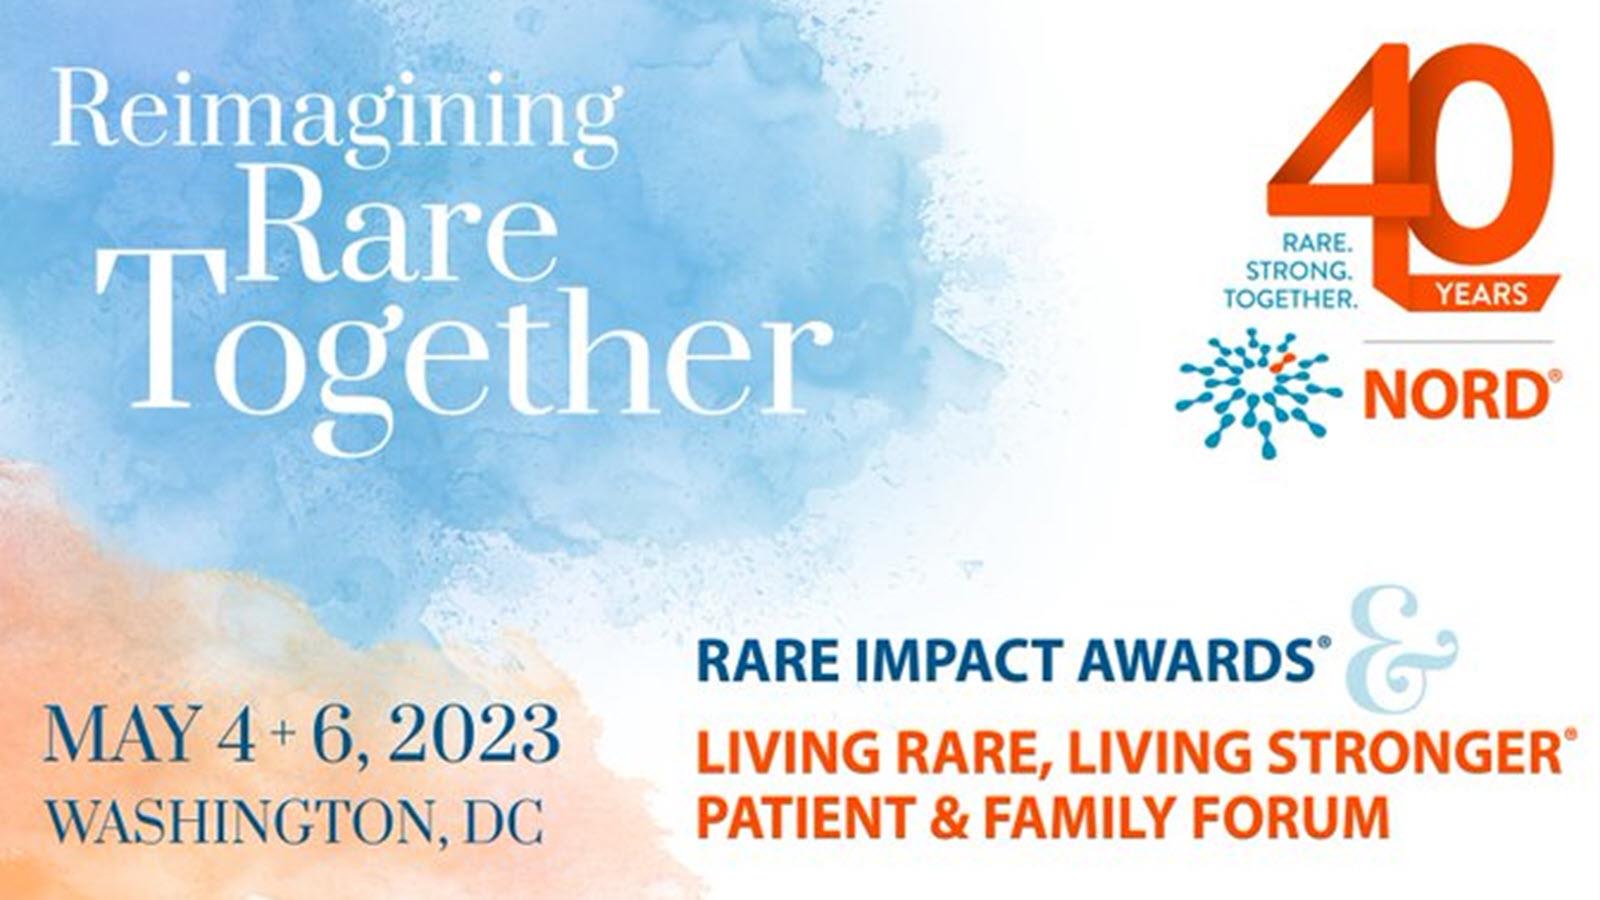 Reimagining Rare Together - Rare Impact Awards from the National Organization for Rare Disorders May 4-6, 2023